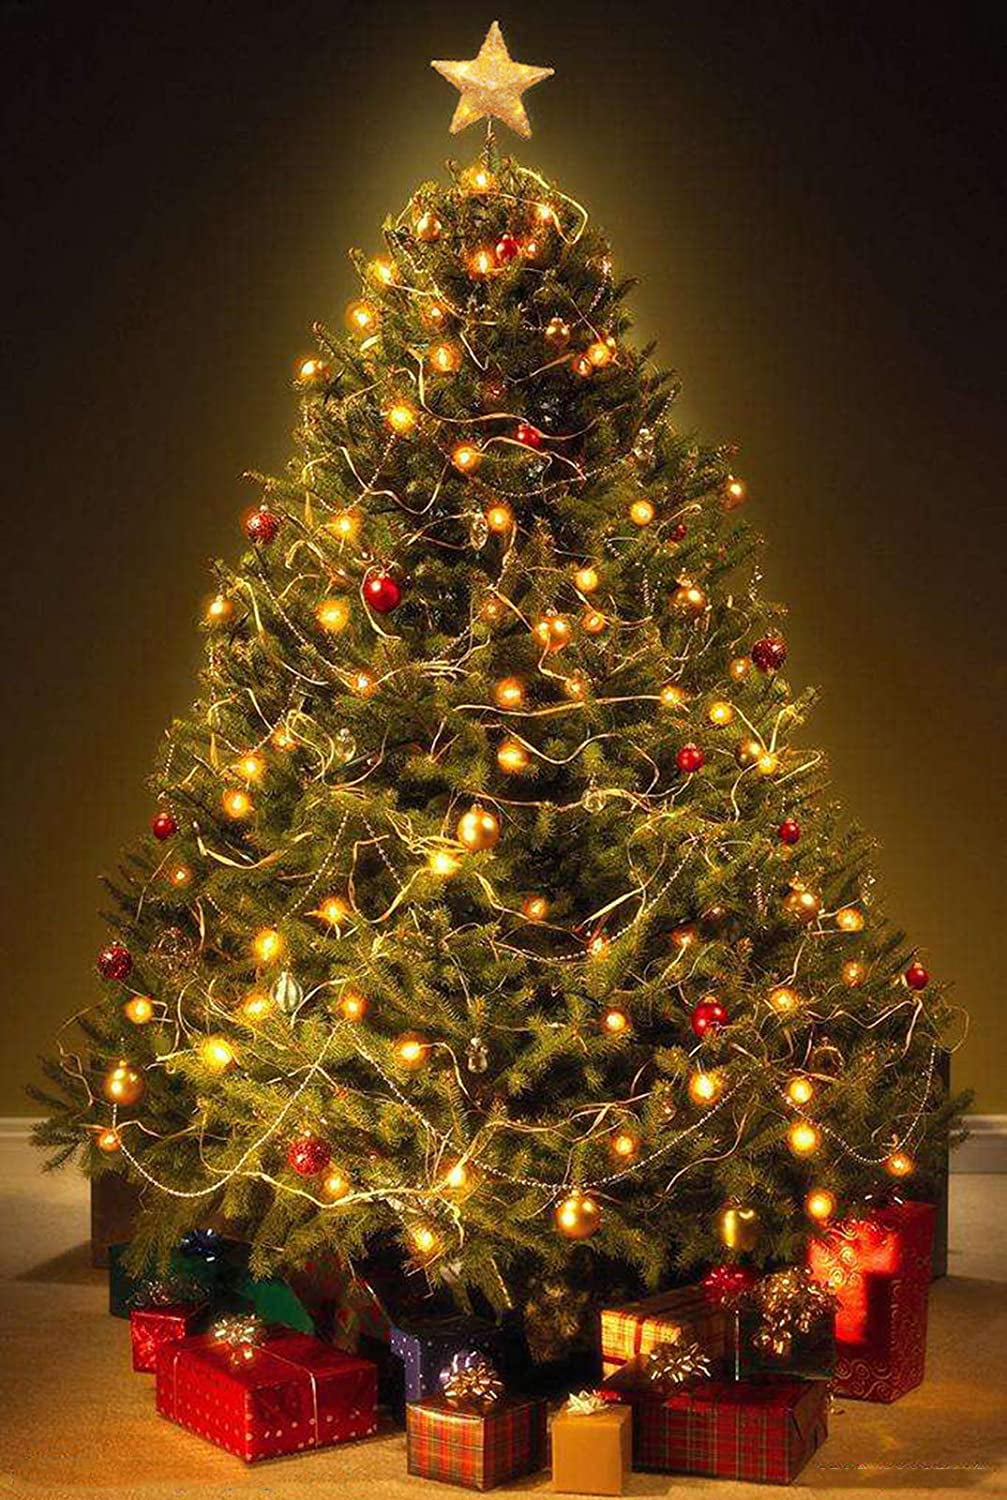 Christmas Tree Topper Star 10 Inch Glittering Gold Xmas Tree Ornament Indoor Party Home Decoration Fit for Ordinary Size Christmas Tree